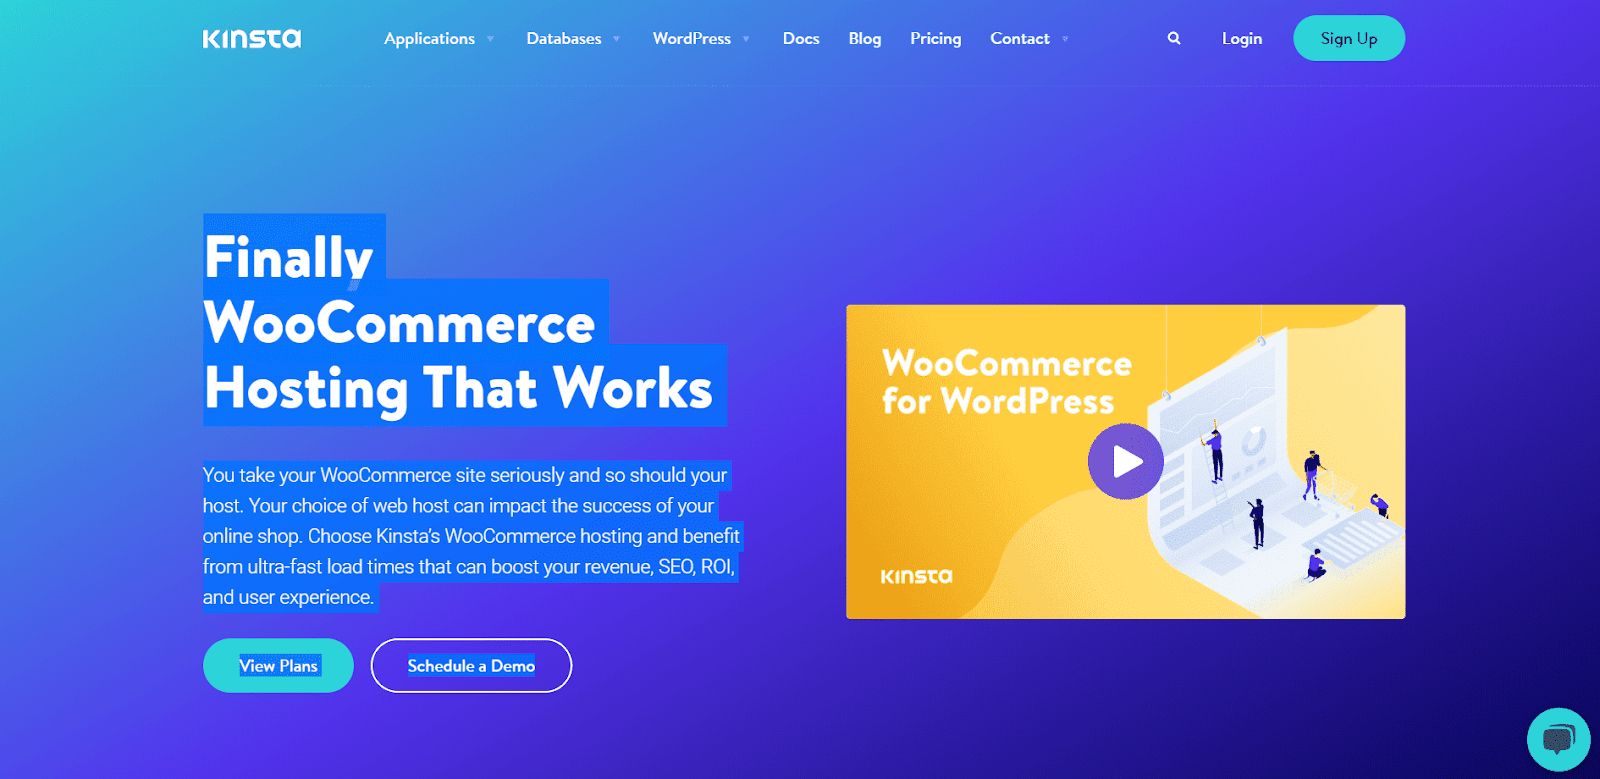 In terms of site speed, Kinsta goes head to head with some of the best hosting for WooCommerce providers on this list.